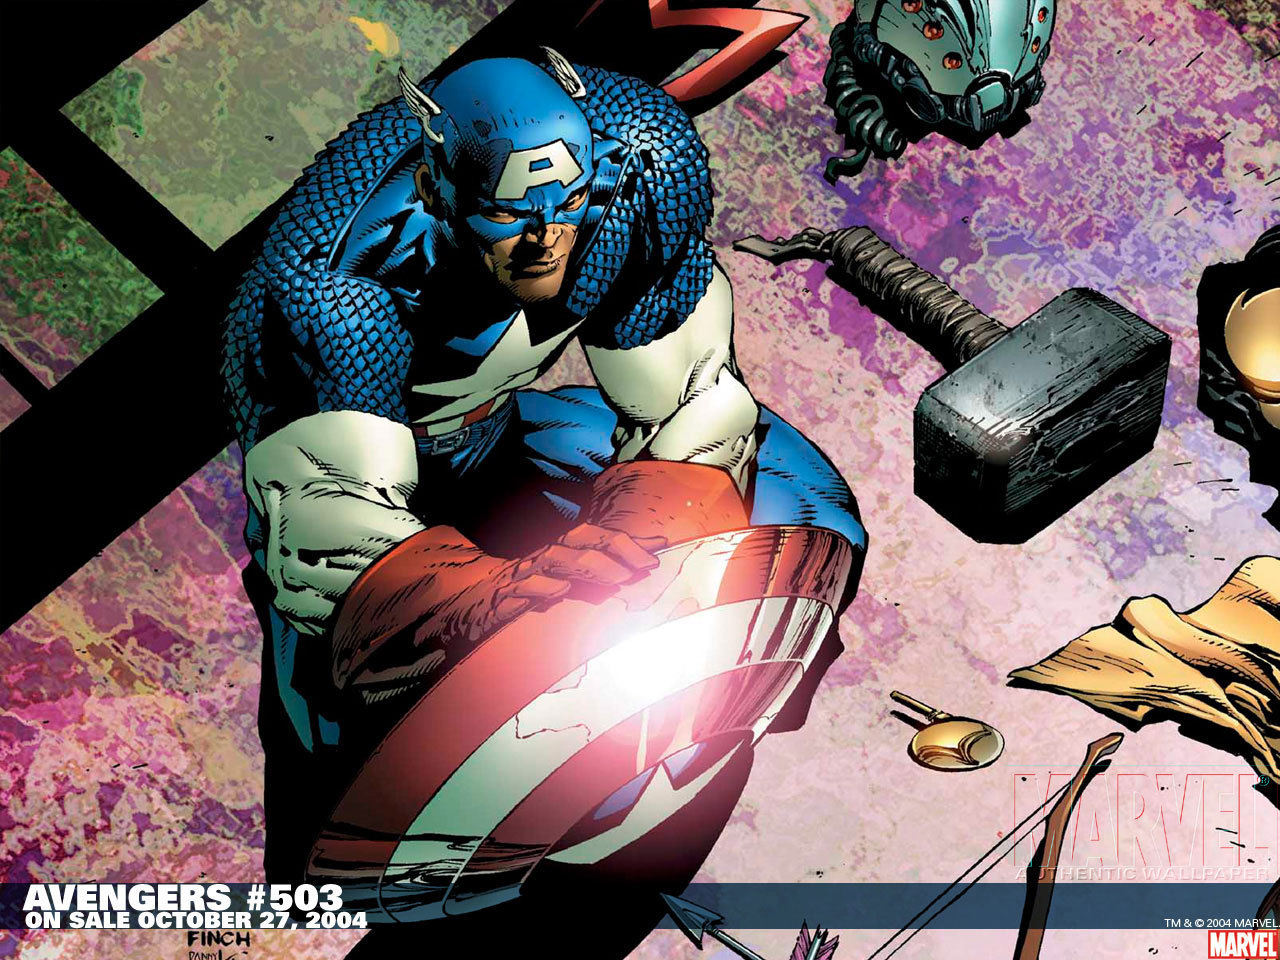 Marvel Comic Captain America Wallpaper The Cartoon Pictures Database